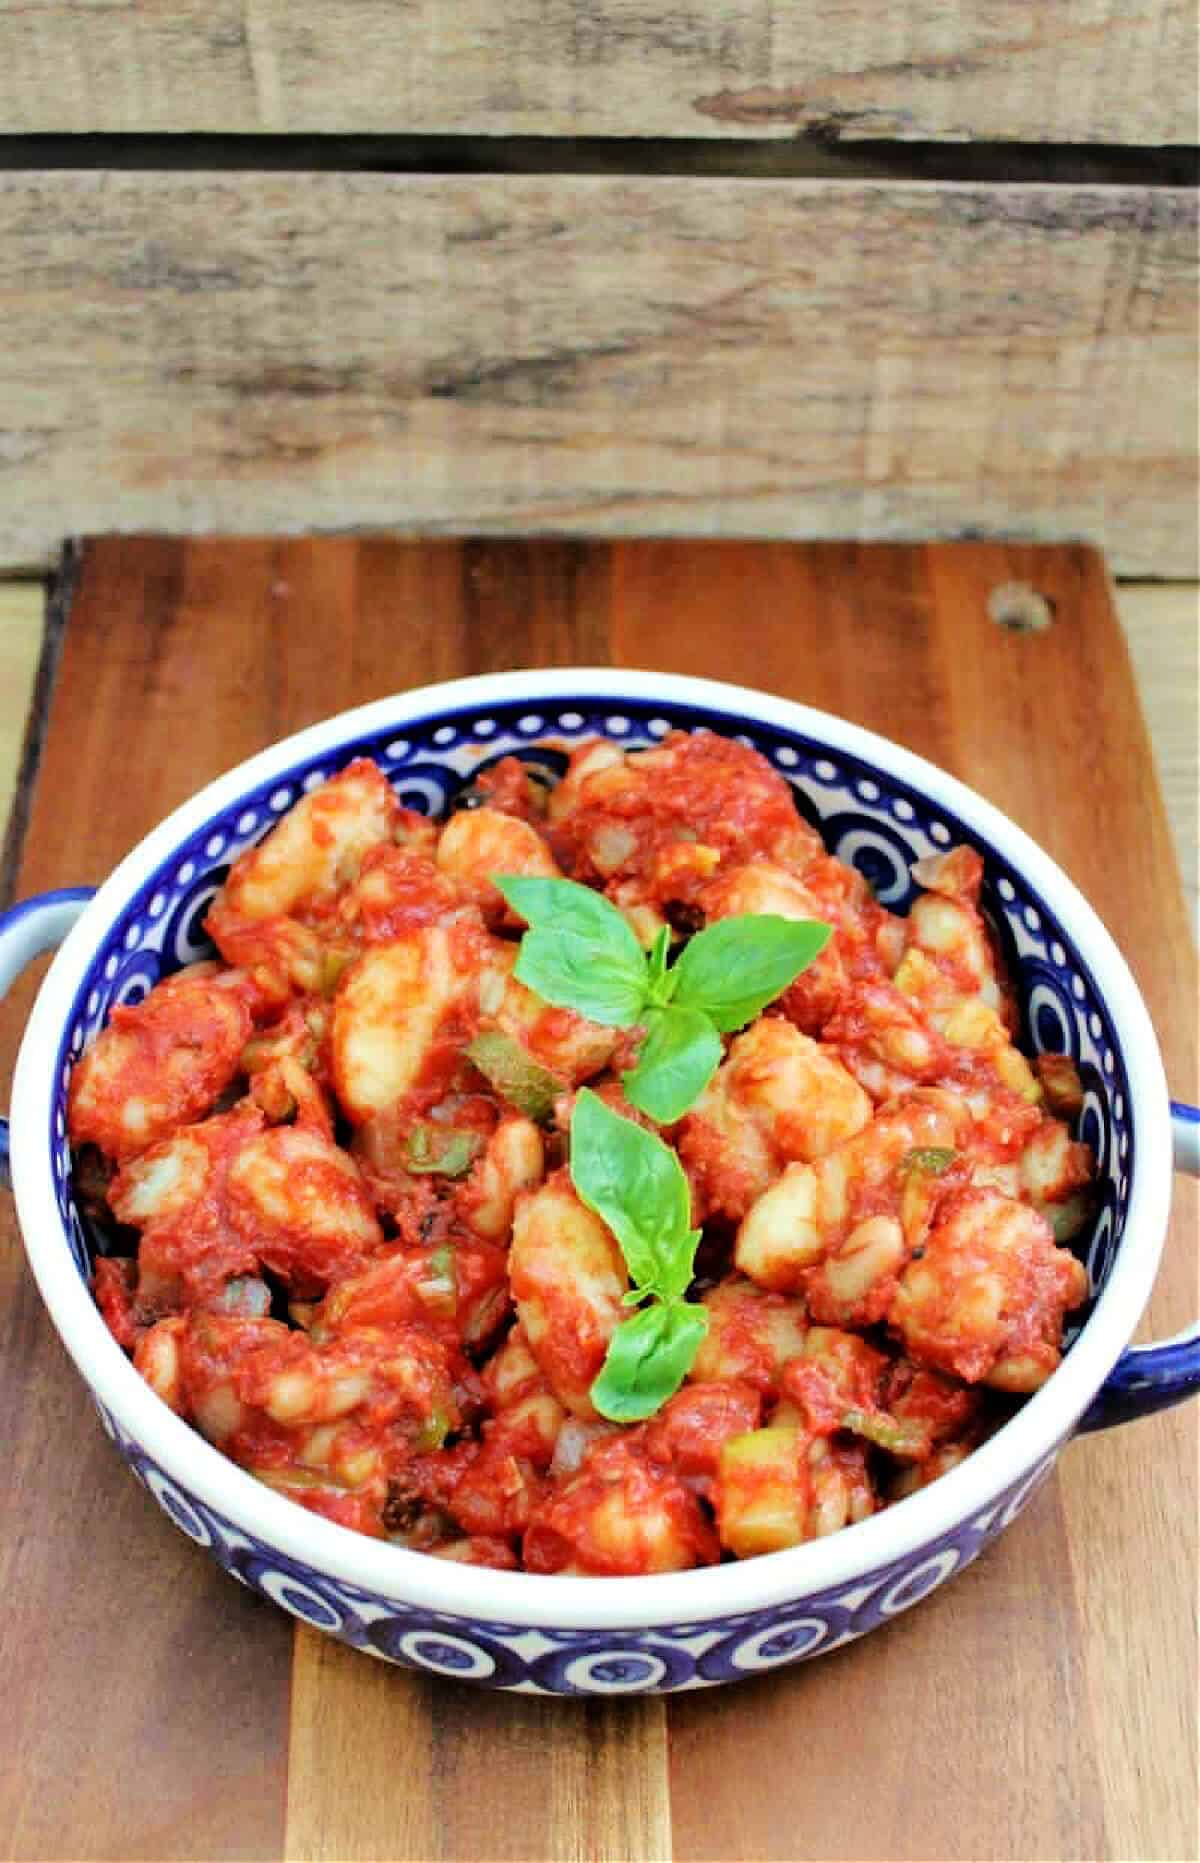 Slow cooker gnocchi with cannellini beans.